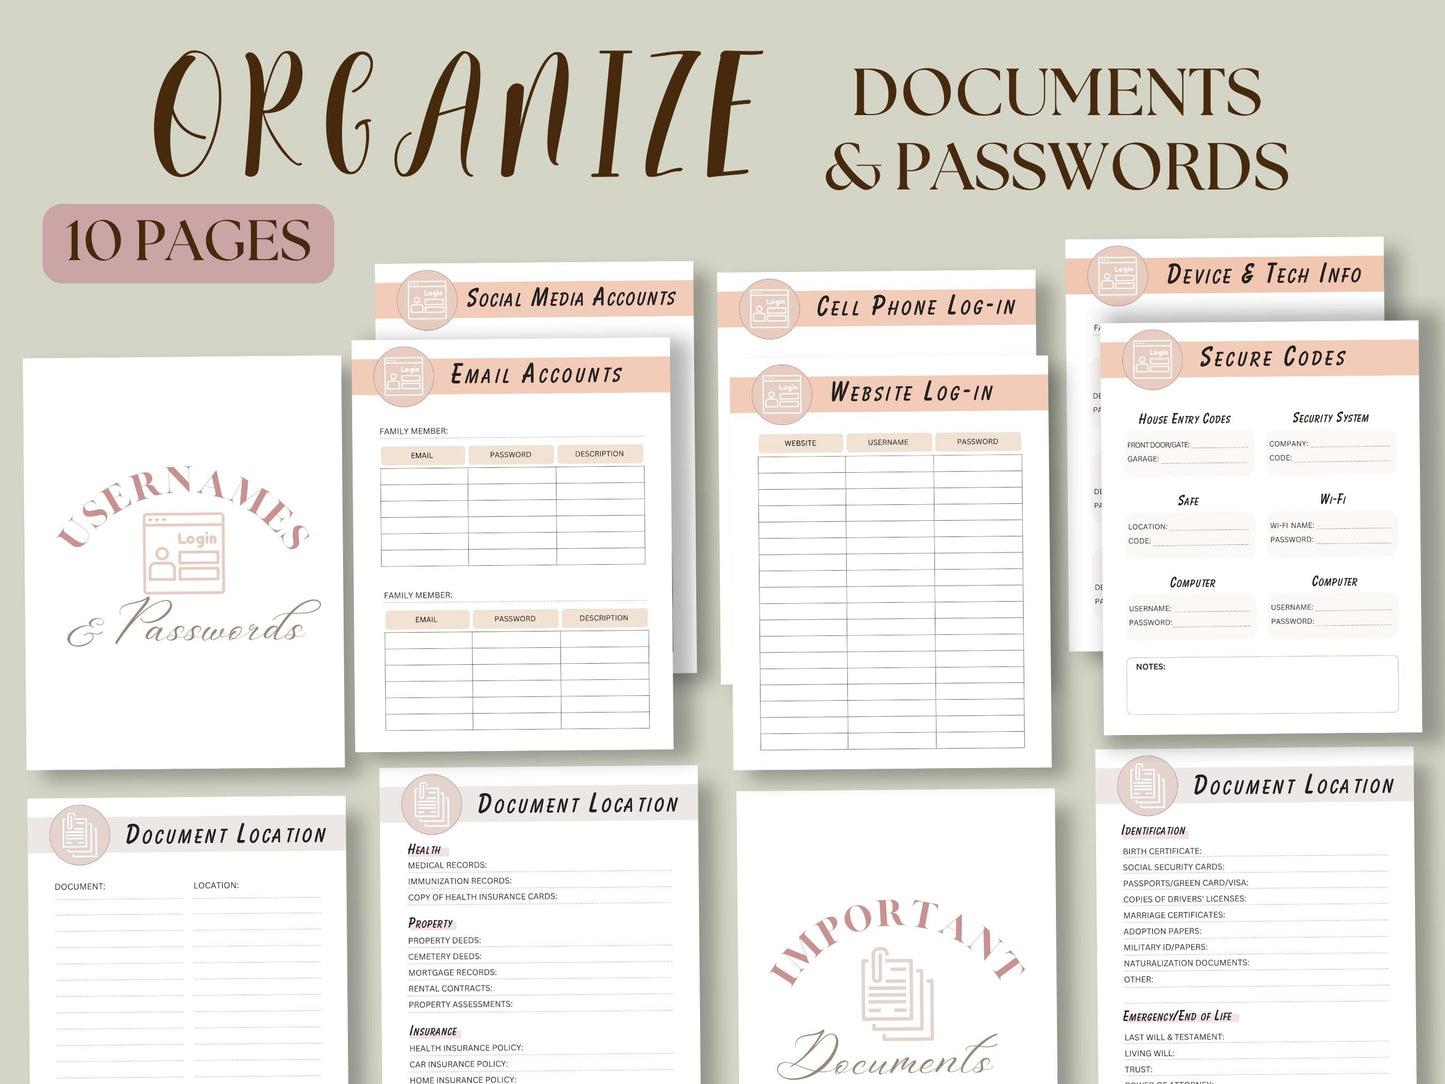 Example pages, organize documents and passwords, secure codes, document locations in your emergency binder